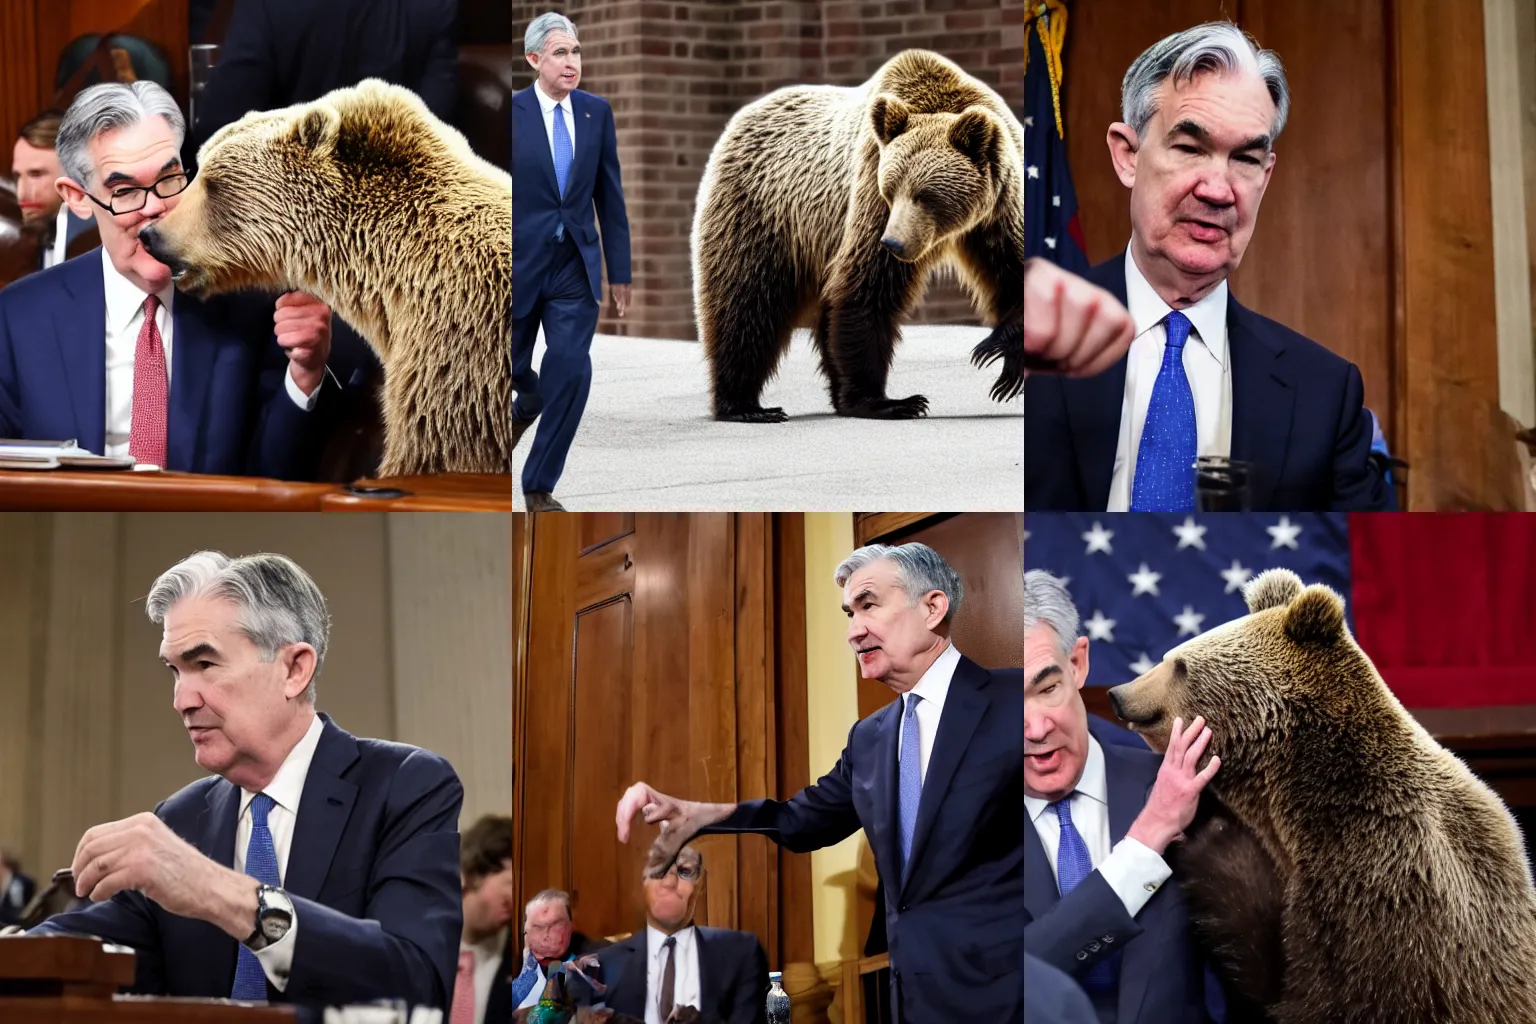 Prompt: Jerome Powell punches a grizzly bear at the State of the Union